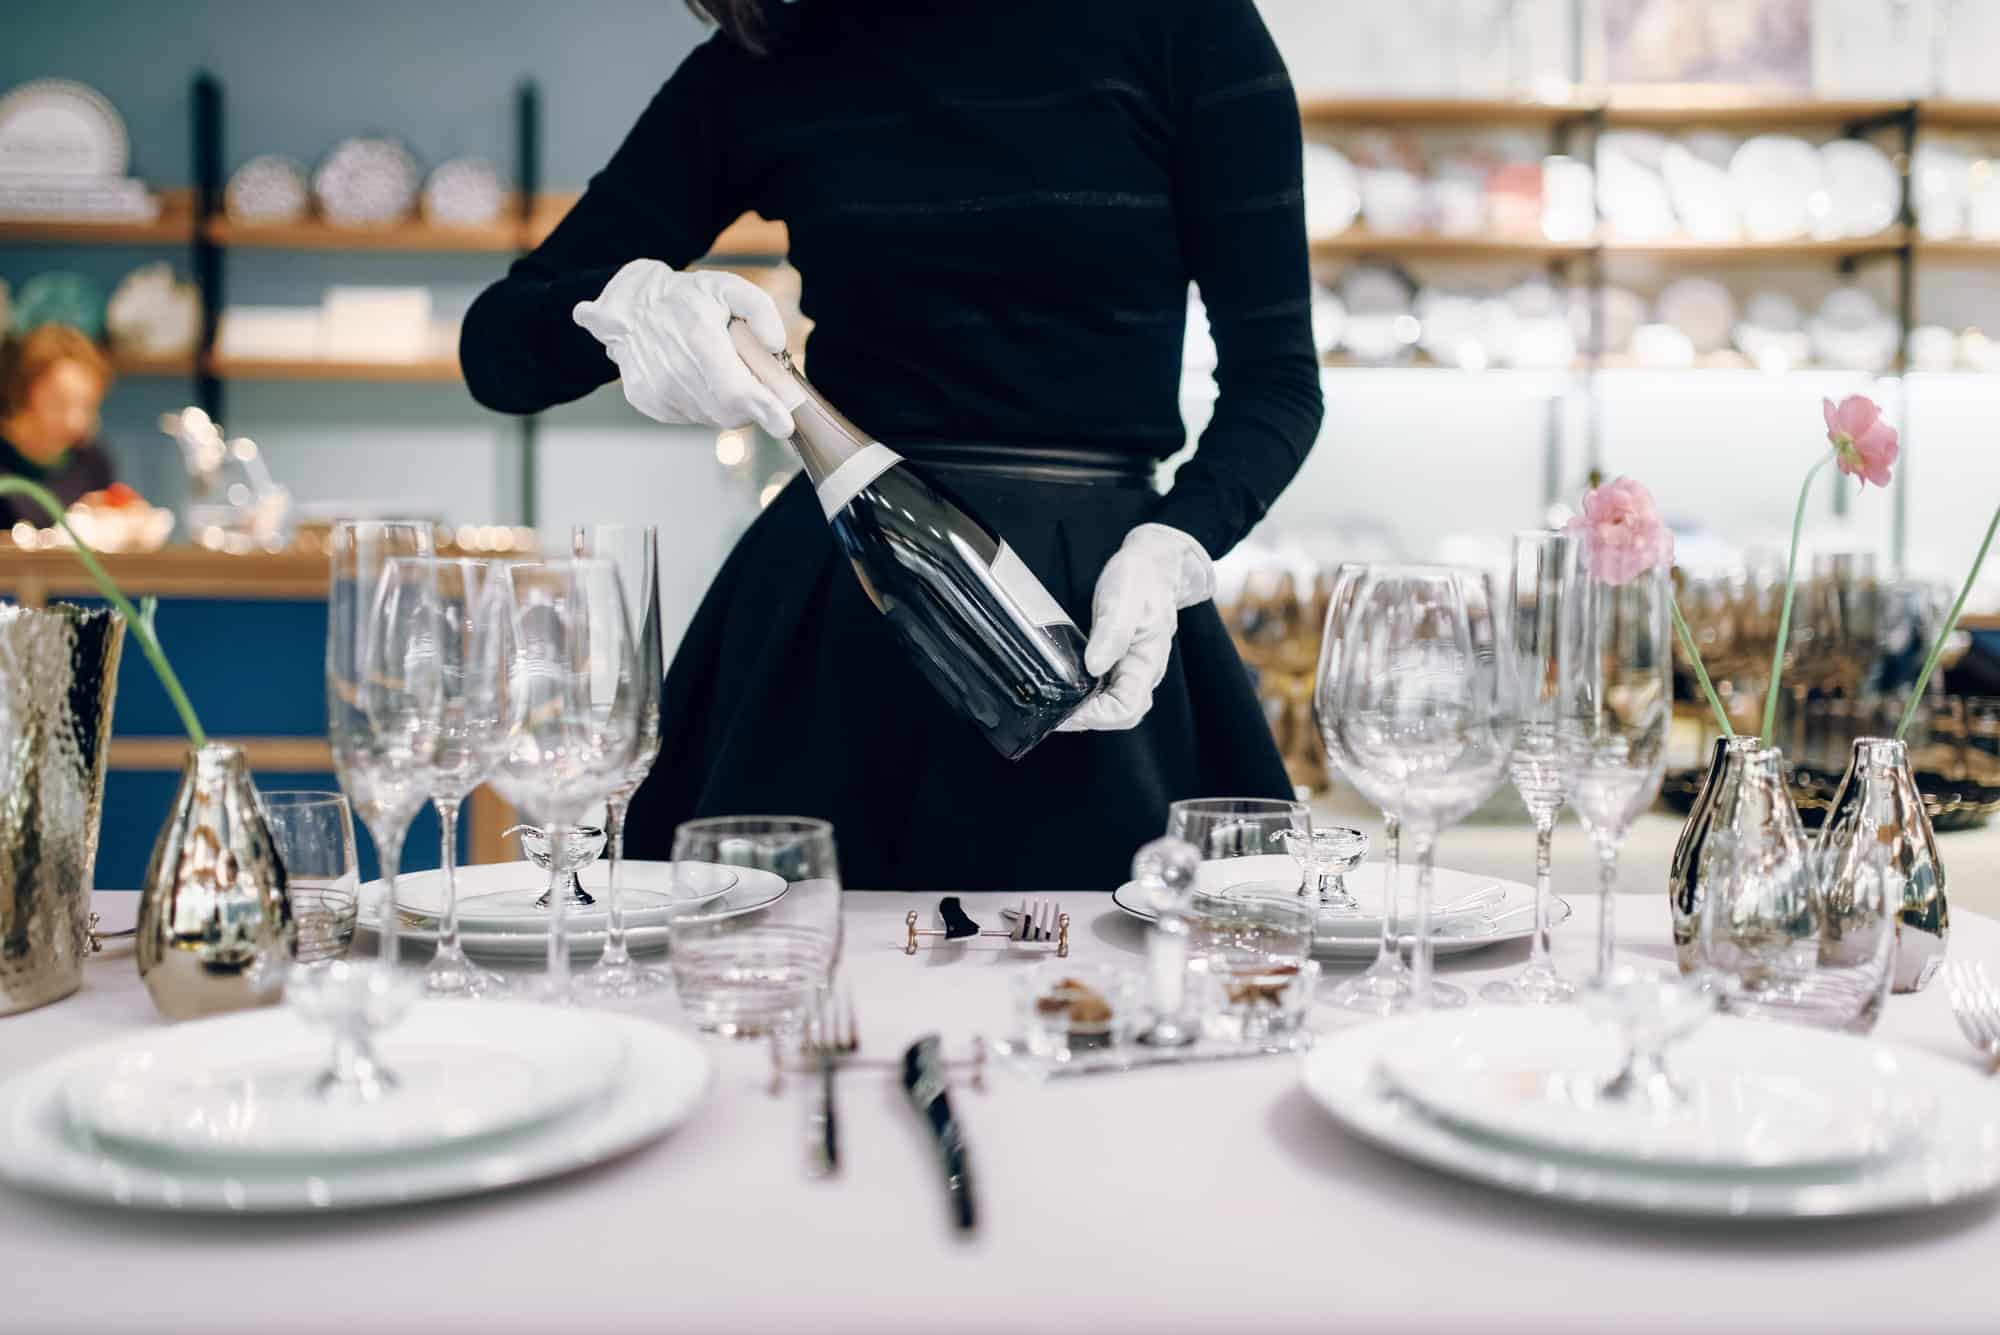 Waitress with a bottle of champagne, table setting